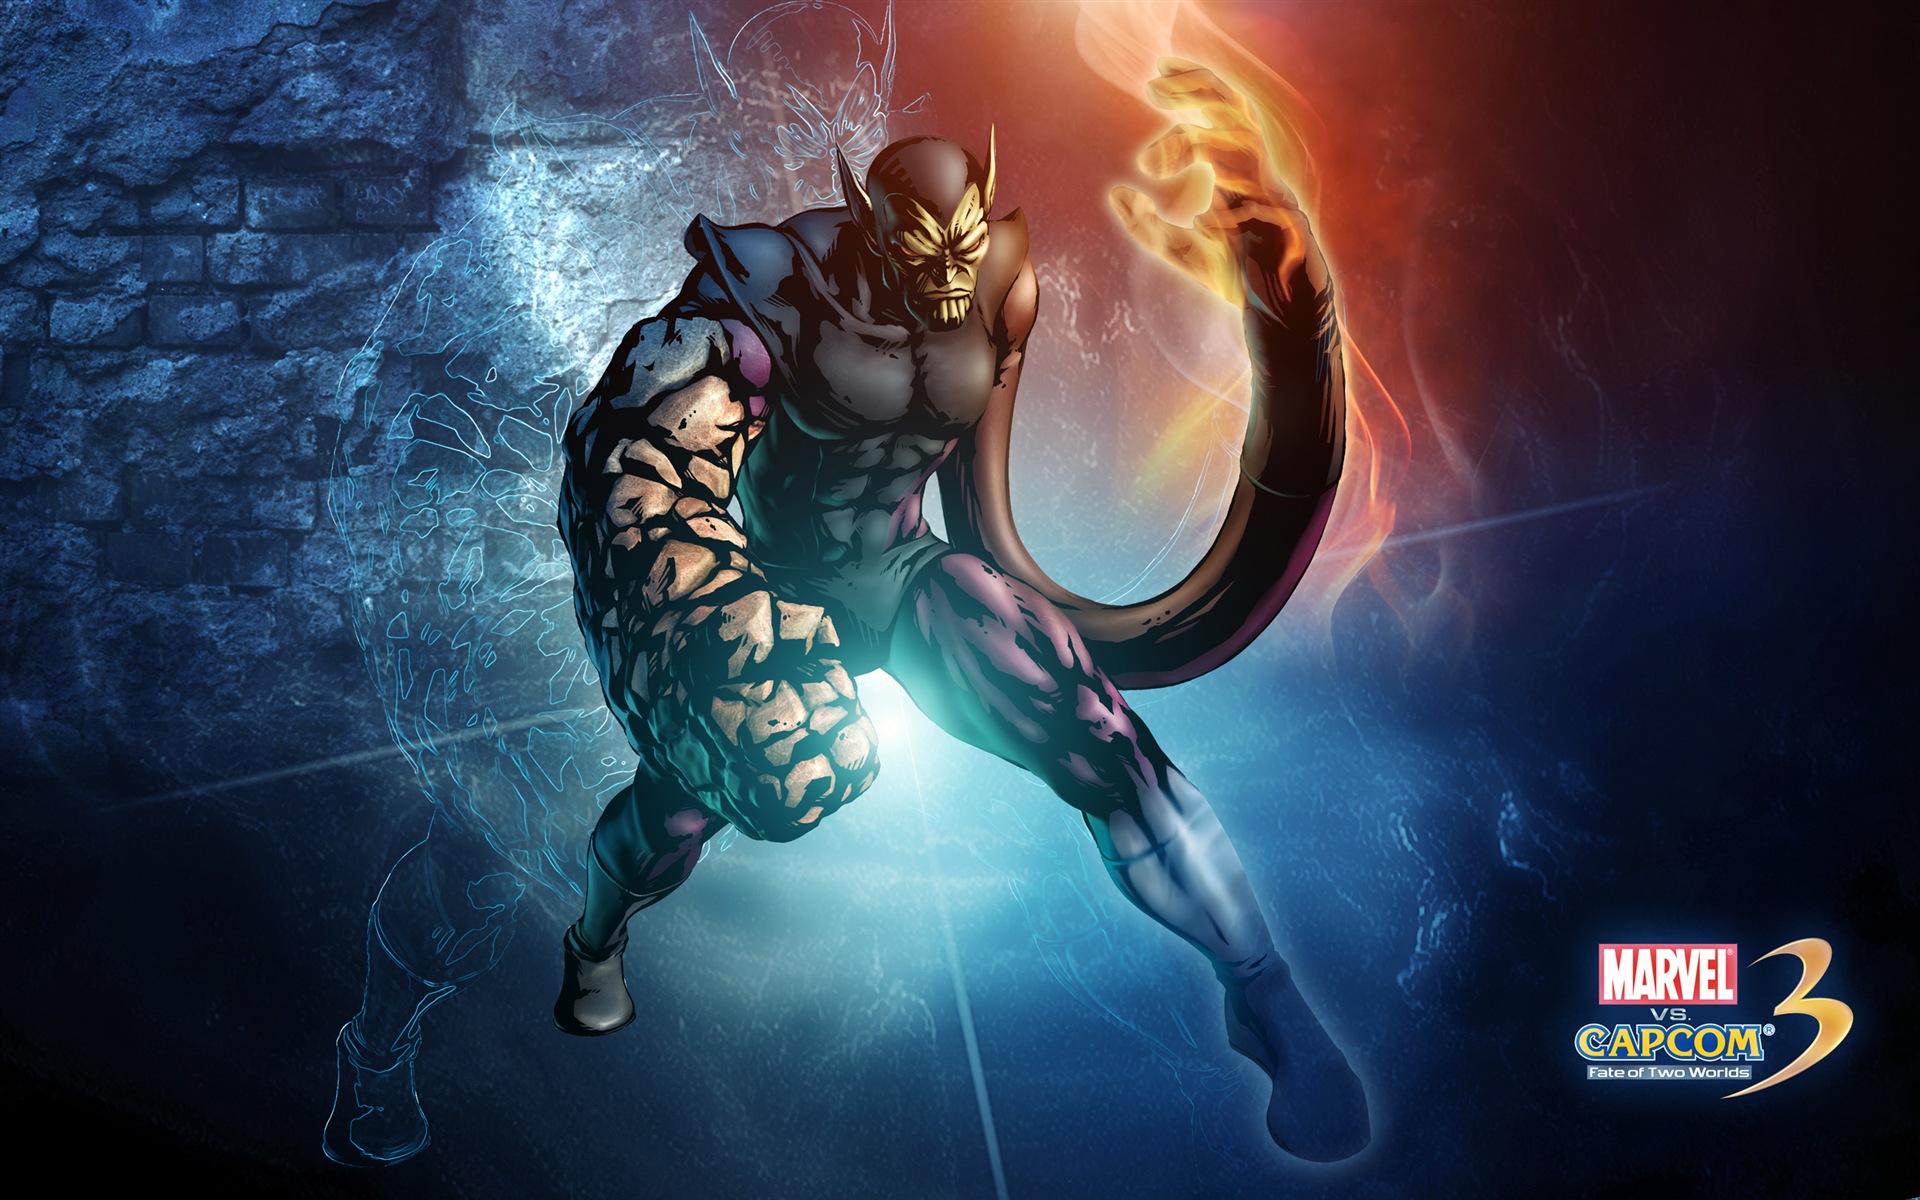 Marvel VS. Capcom 3: Fate of Two Worlds HD game wallpapers #24 - 1920x1200